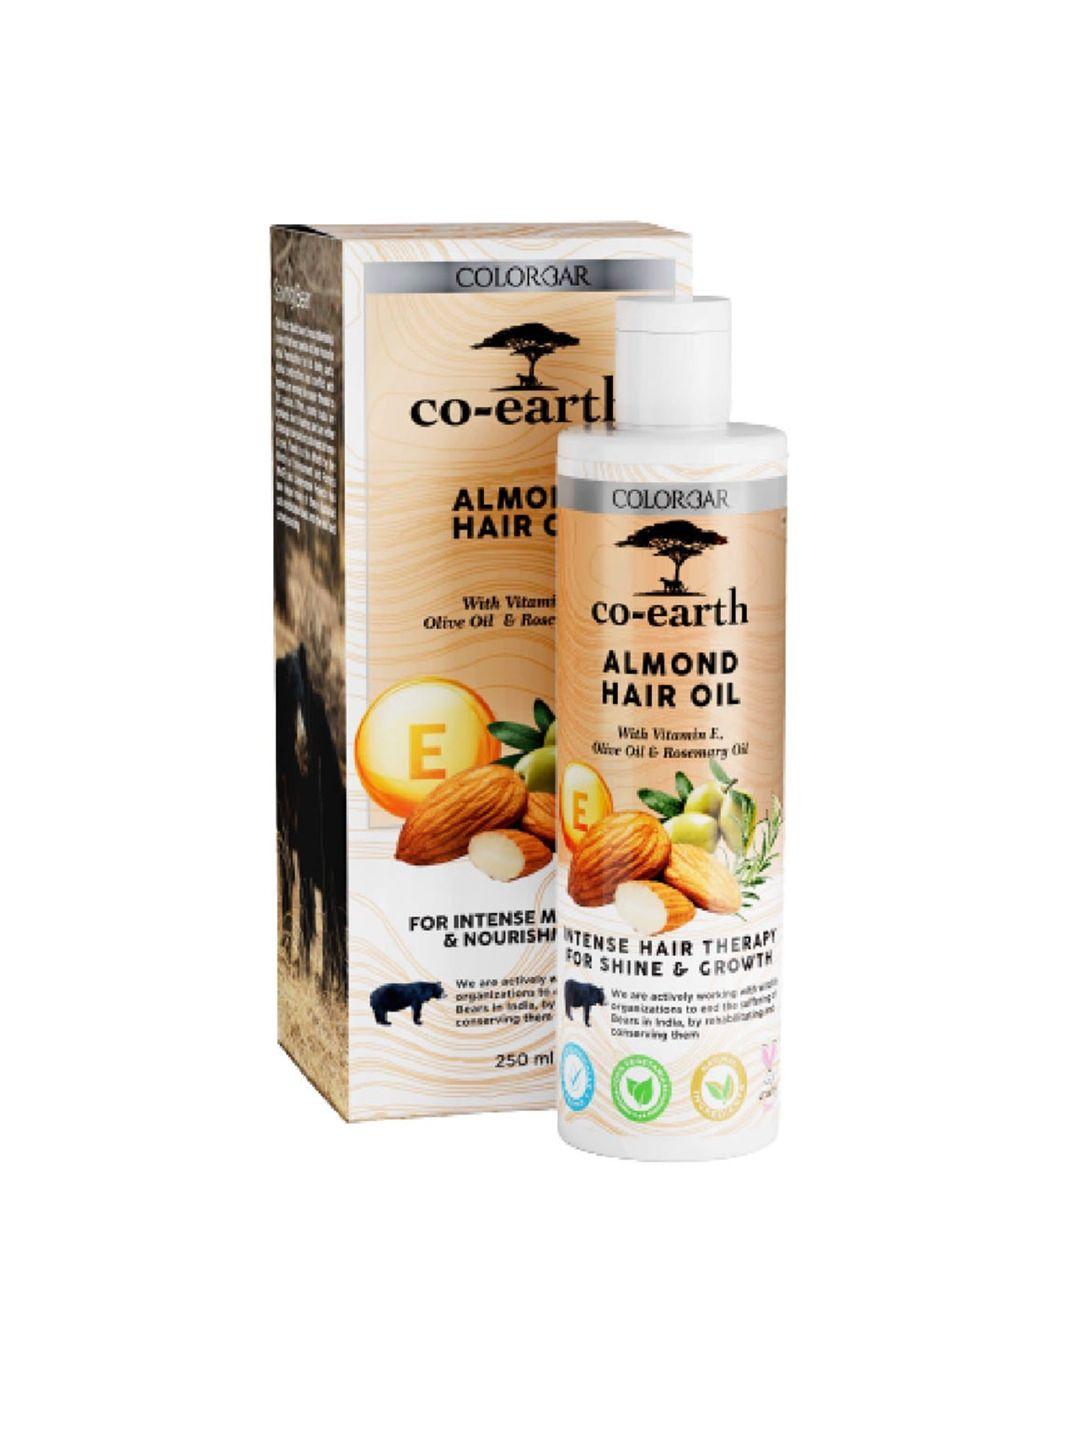 colorbar co-earth almond hair oil with vitamin e & olive oil for shine & growth - 250ml